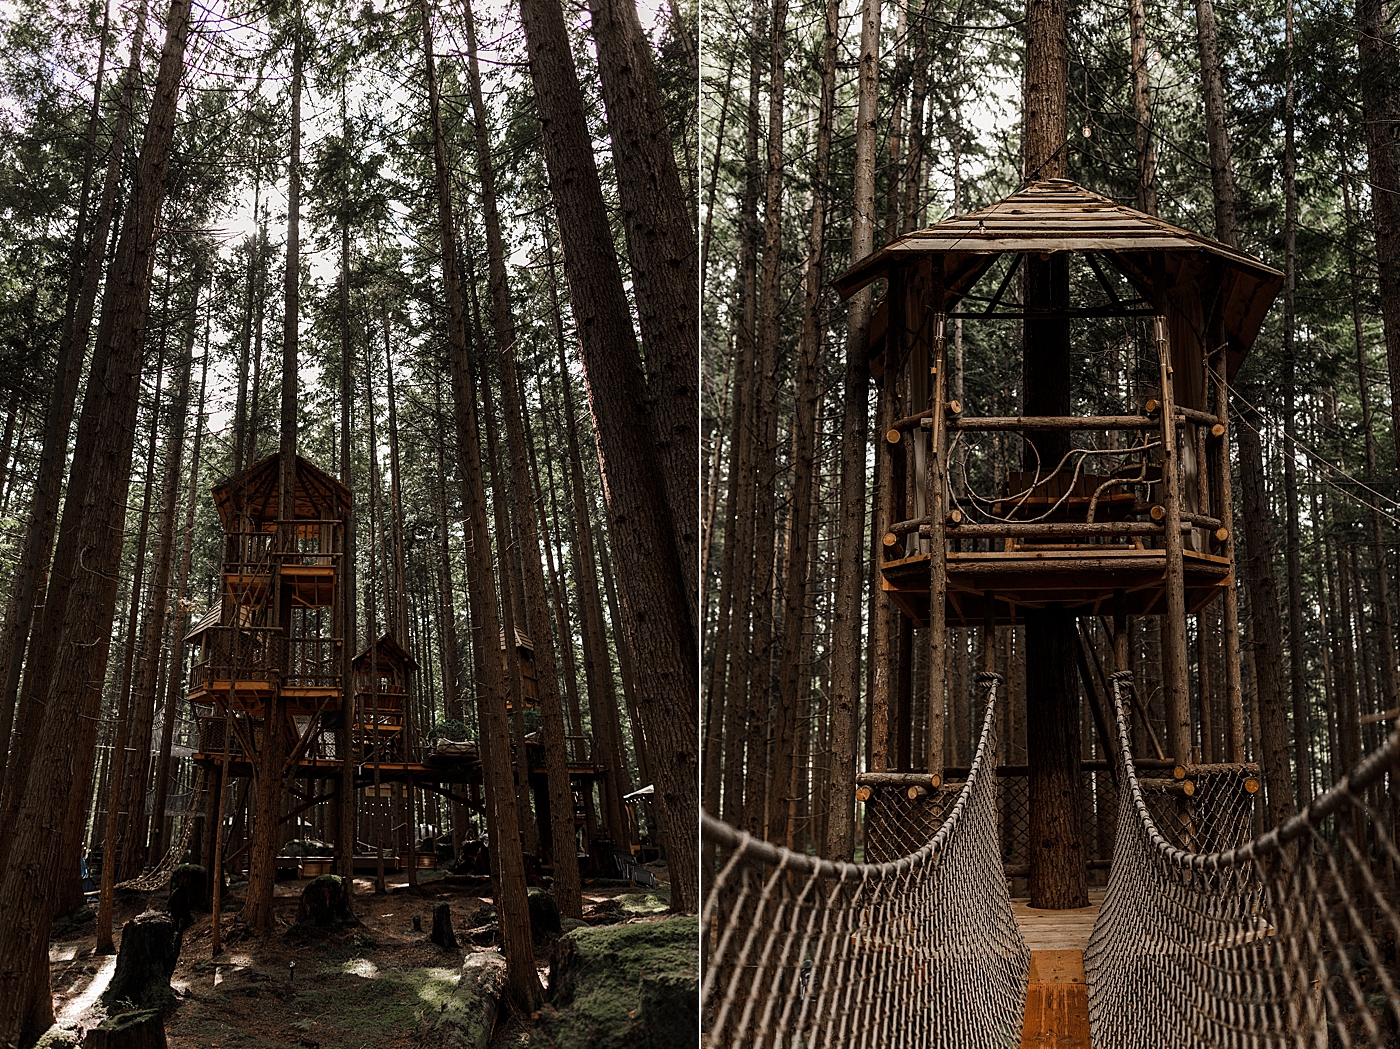 Treehouse wedding venue in Washington State | The Emerald Forest | Megan Montalvo Photography